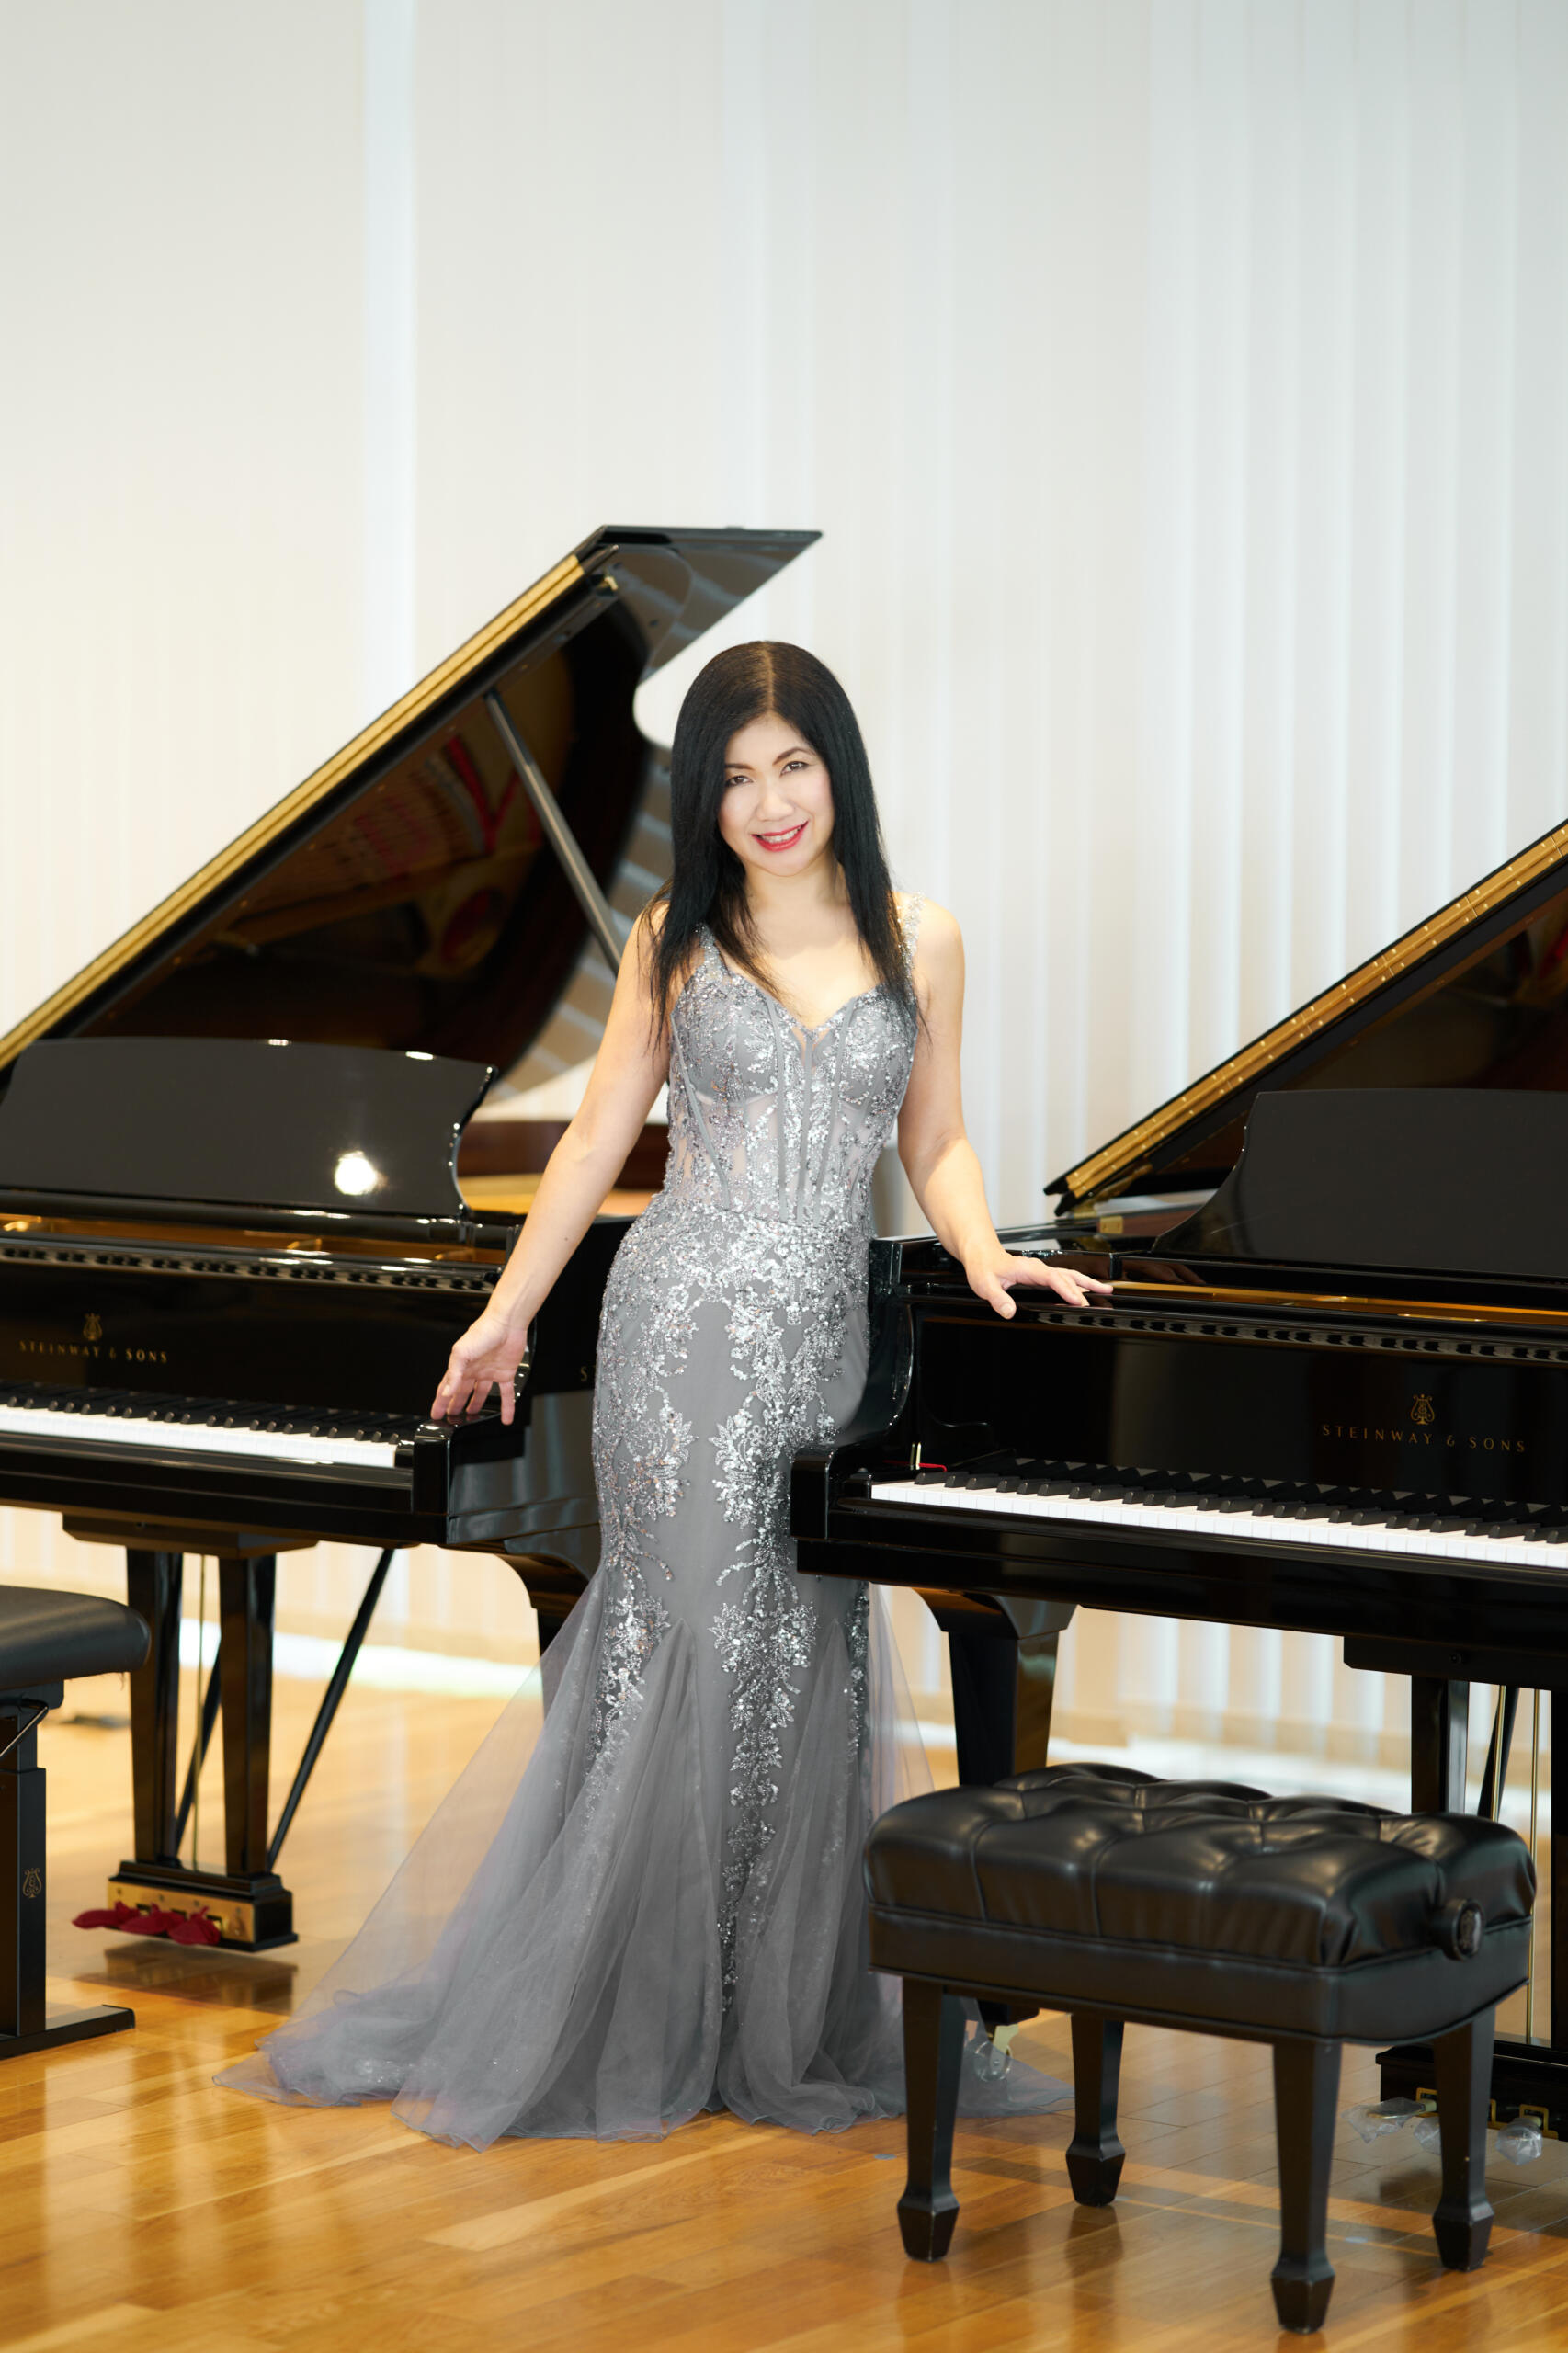 A lady in a glittering evening dress leans against a grand piano.